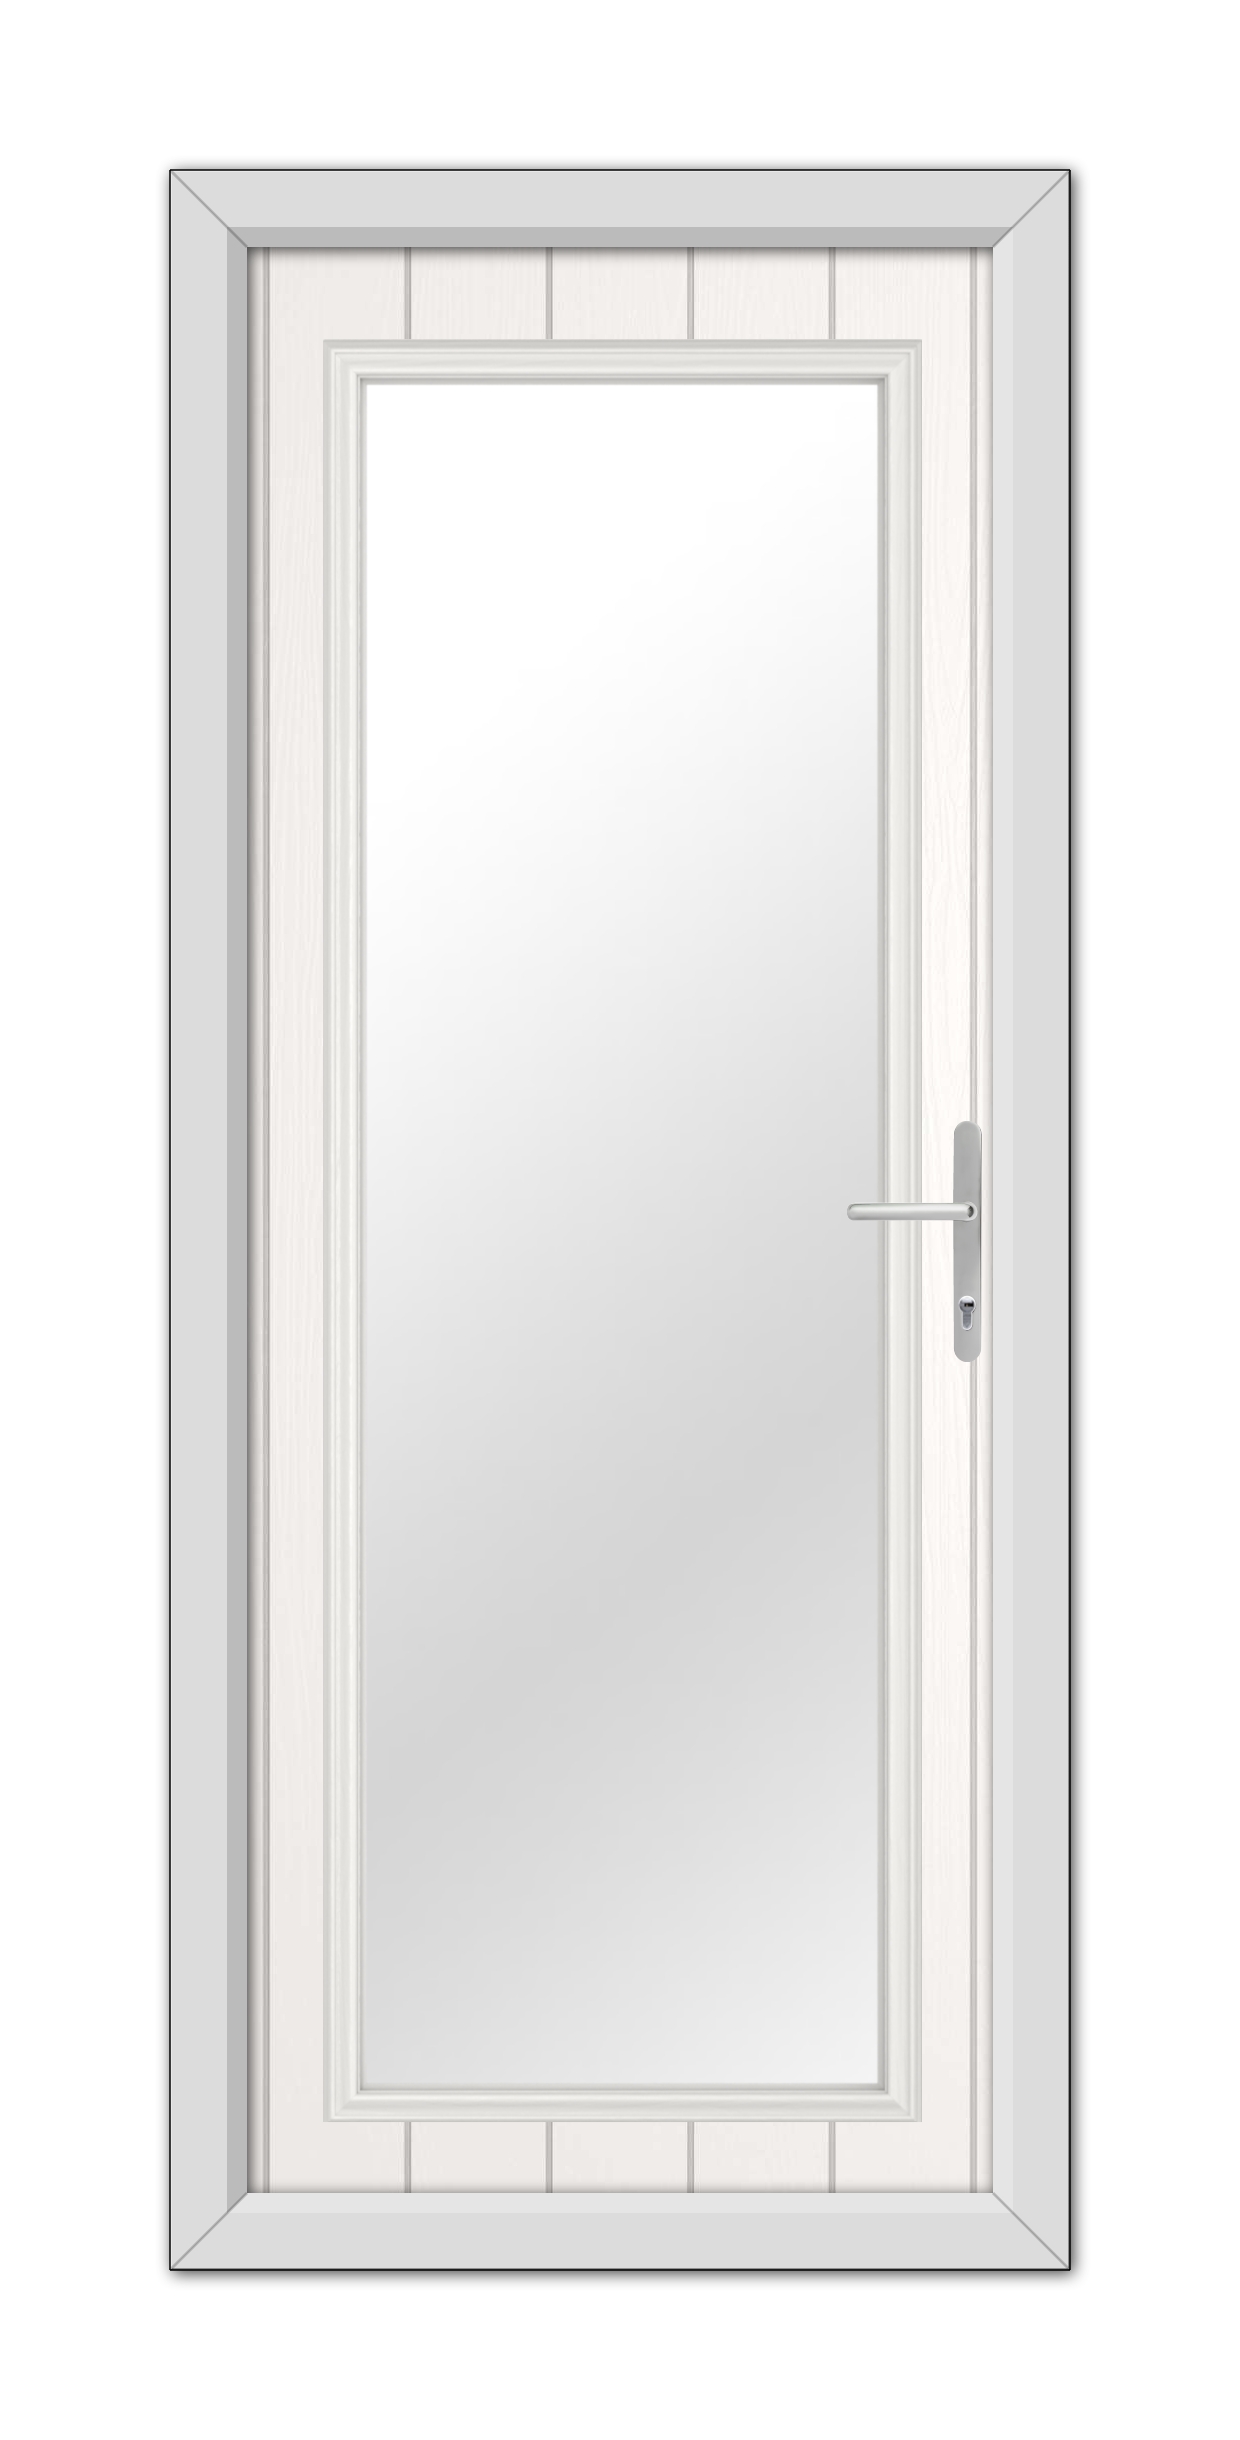 White Hatton Composite Door with a central glass panel and a silver handle on the right side, set in a light gray wall.